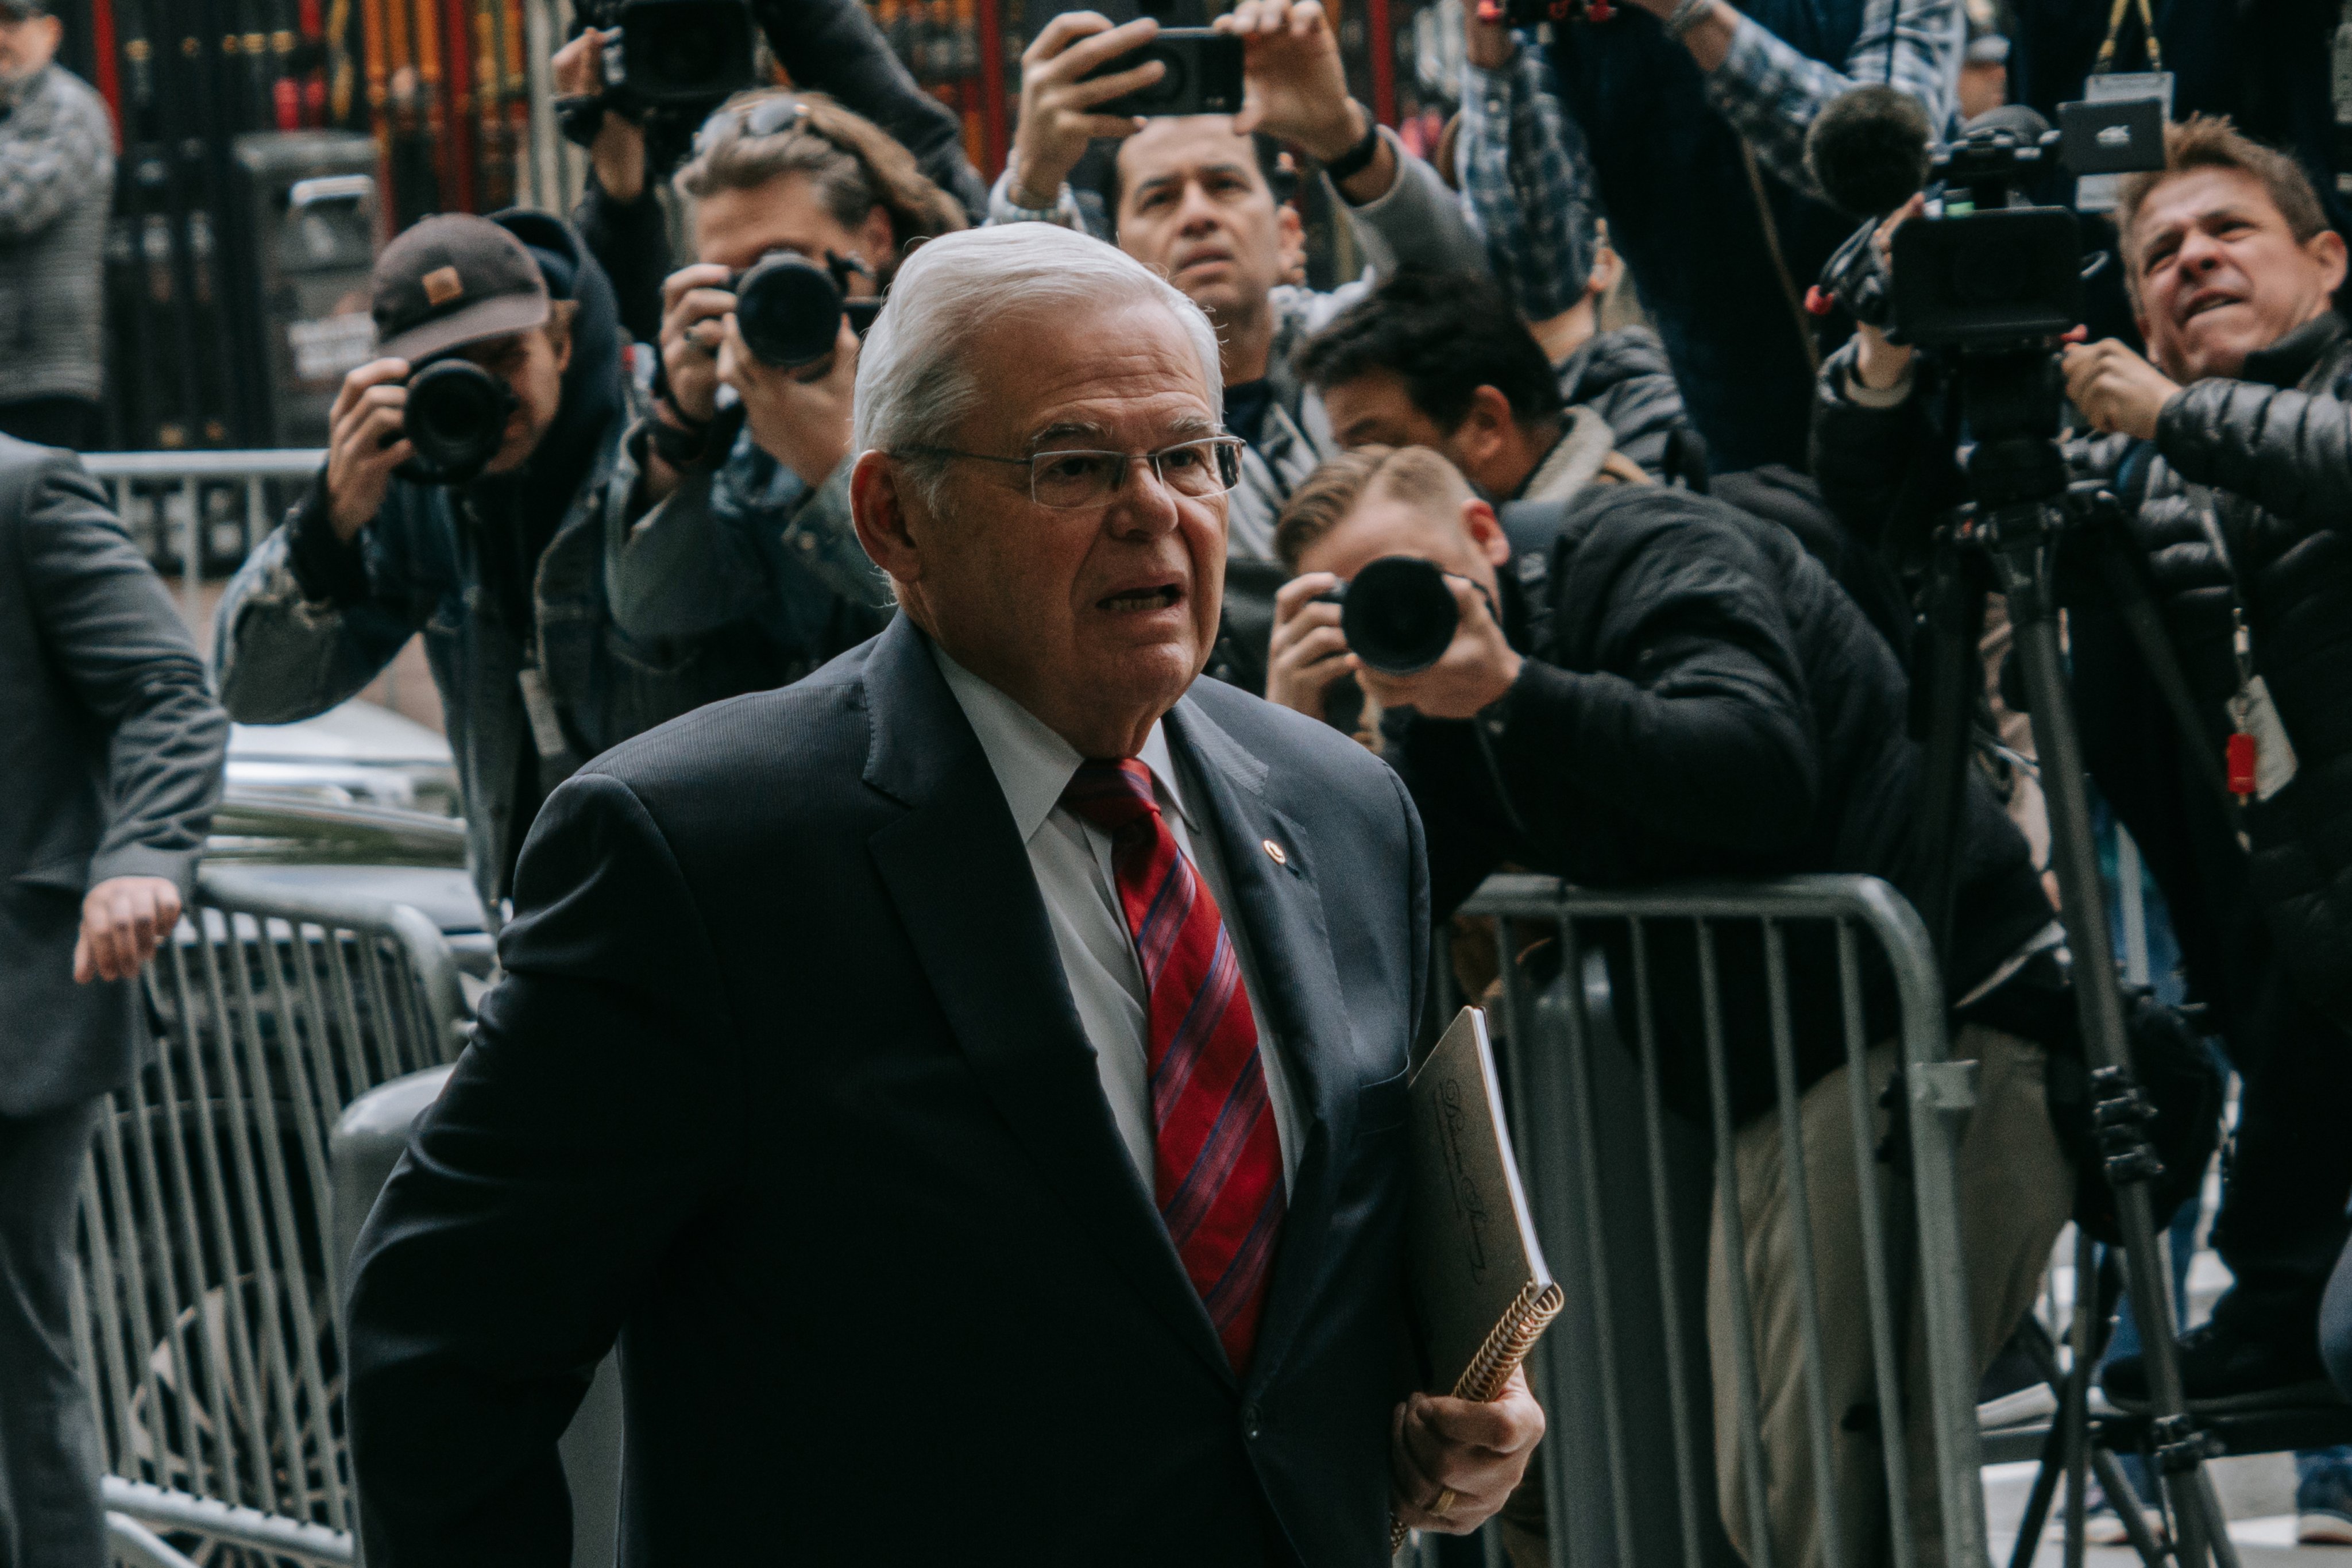 New Jersey Senator Bob Menendez arrives at a US federal court building on the first day of his corruption trial in New York on Monday. Photo: EPA-EFE